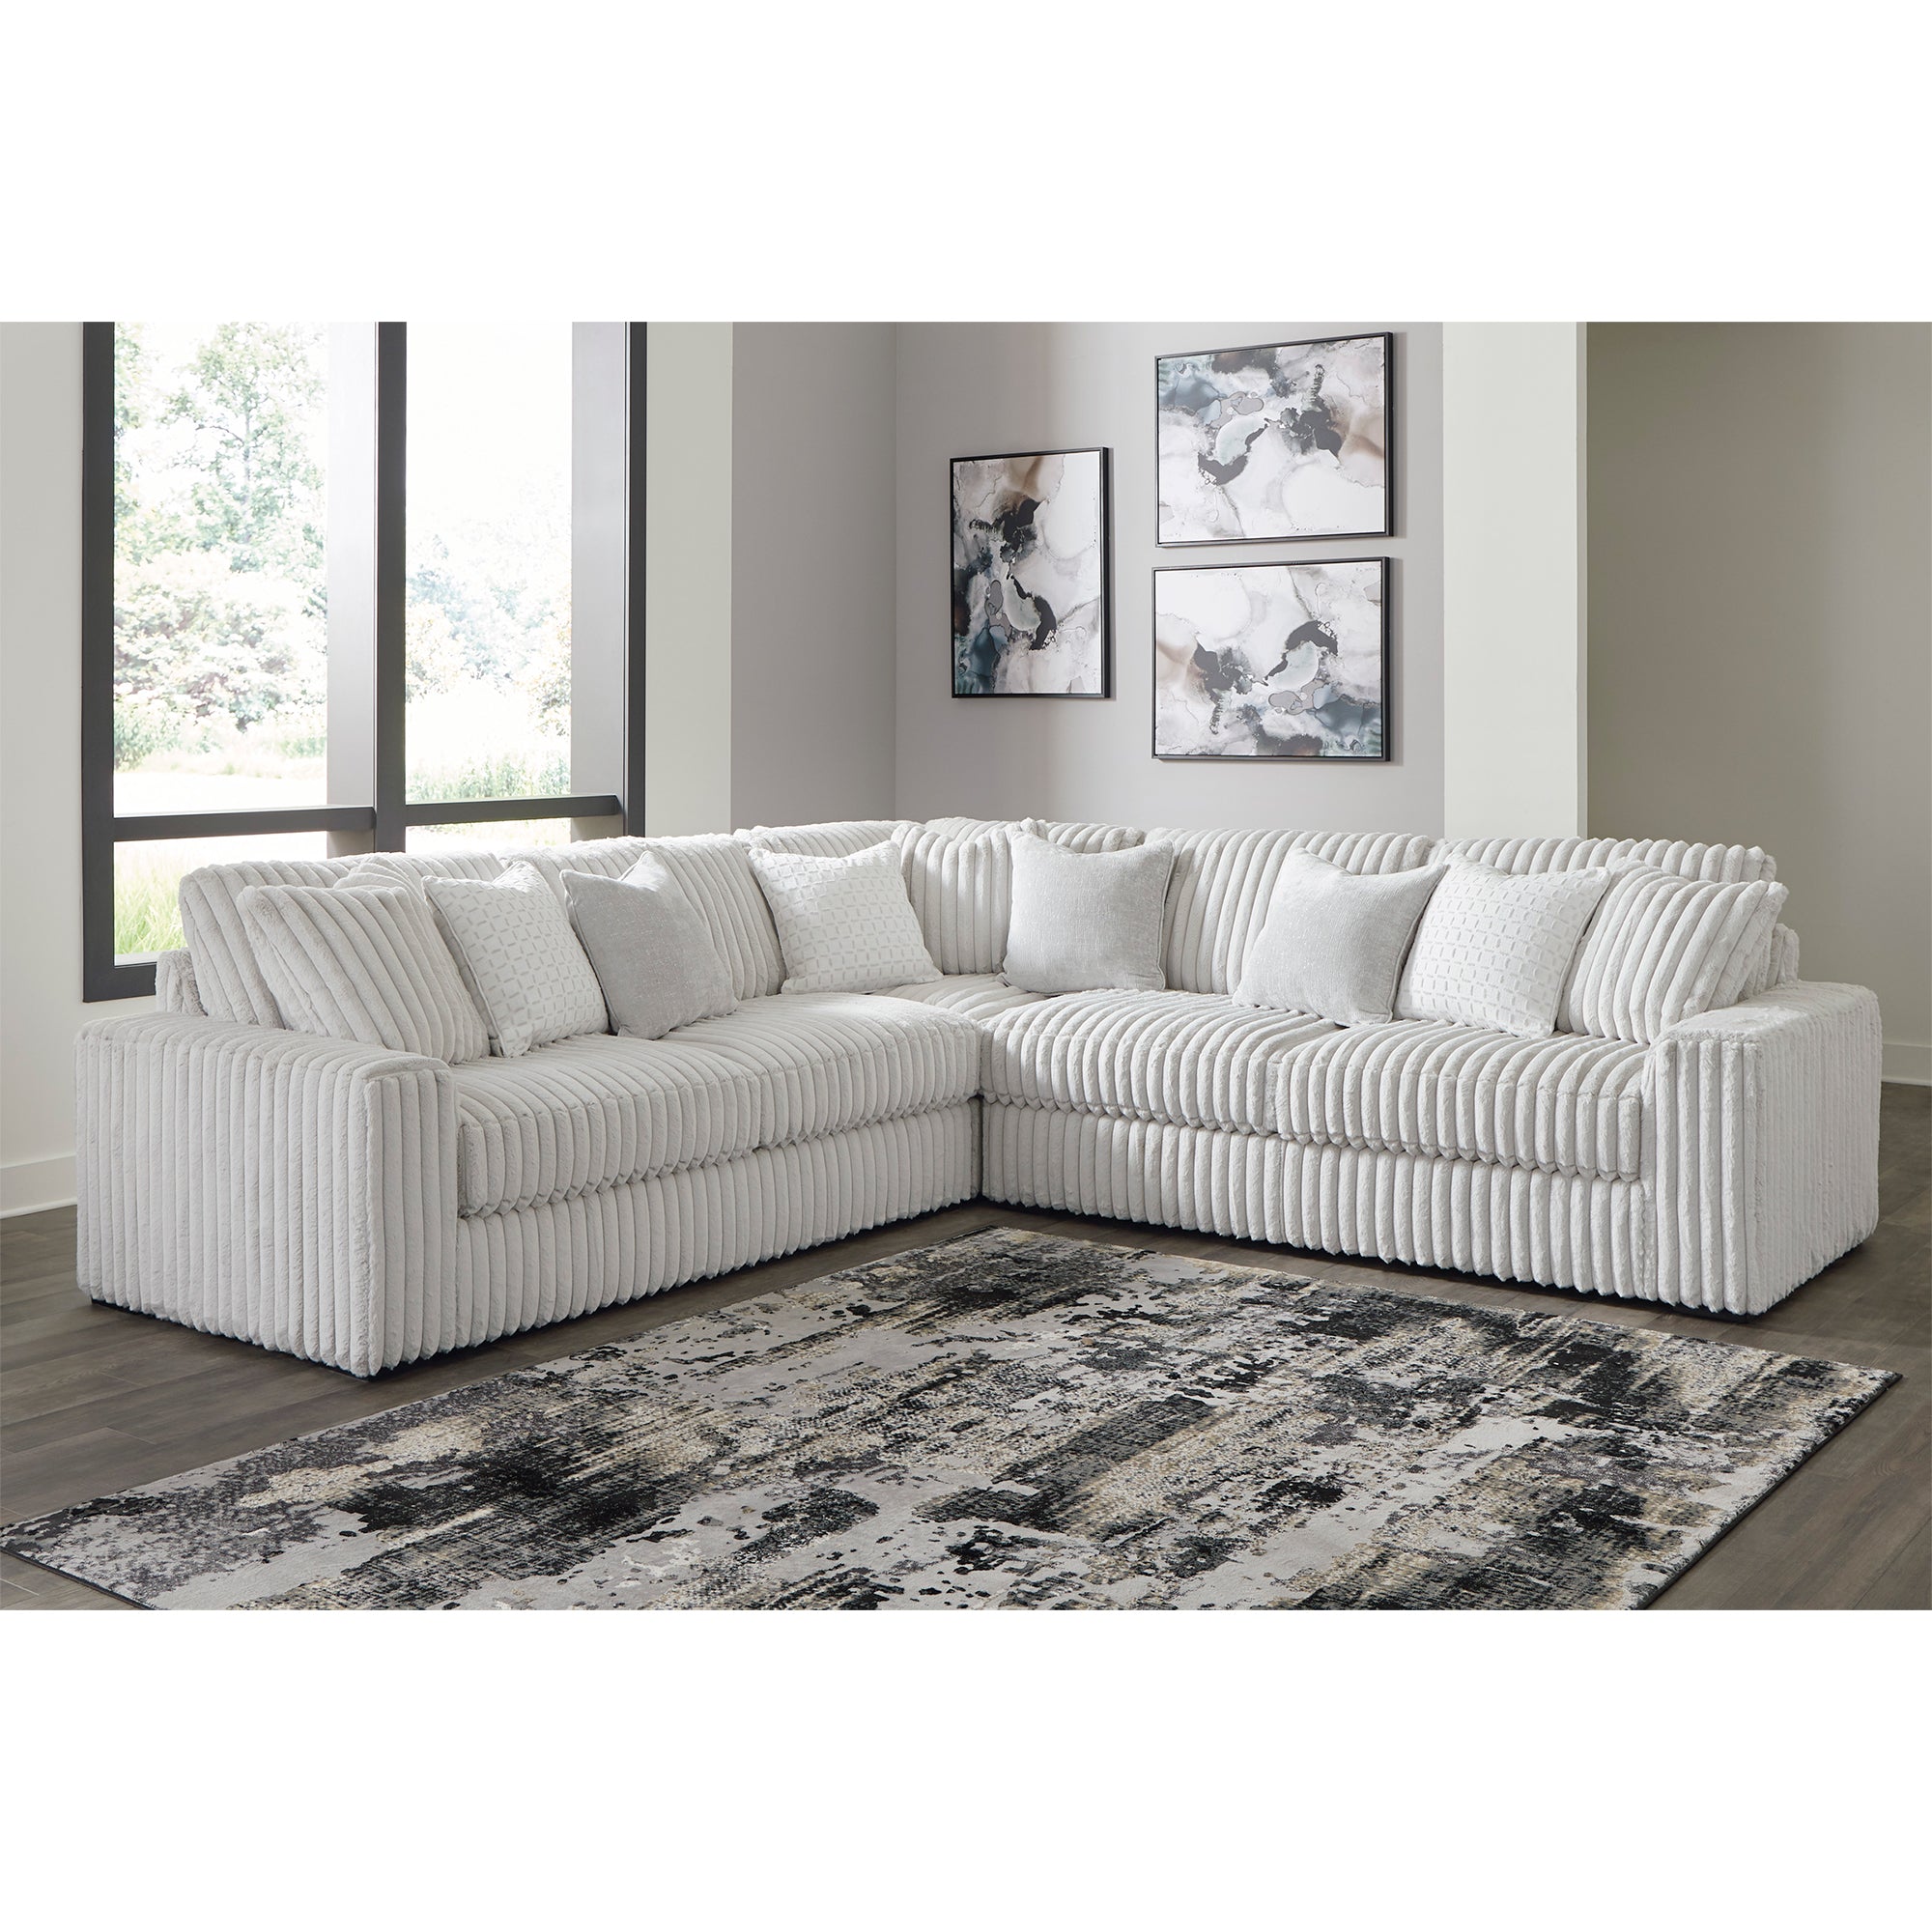 Luxurious Stupendous Sectional in 3 pieces including a left-arm sofa, wedge, and right-arm sofa, perfect for stylish lounging